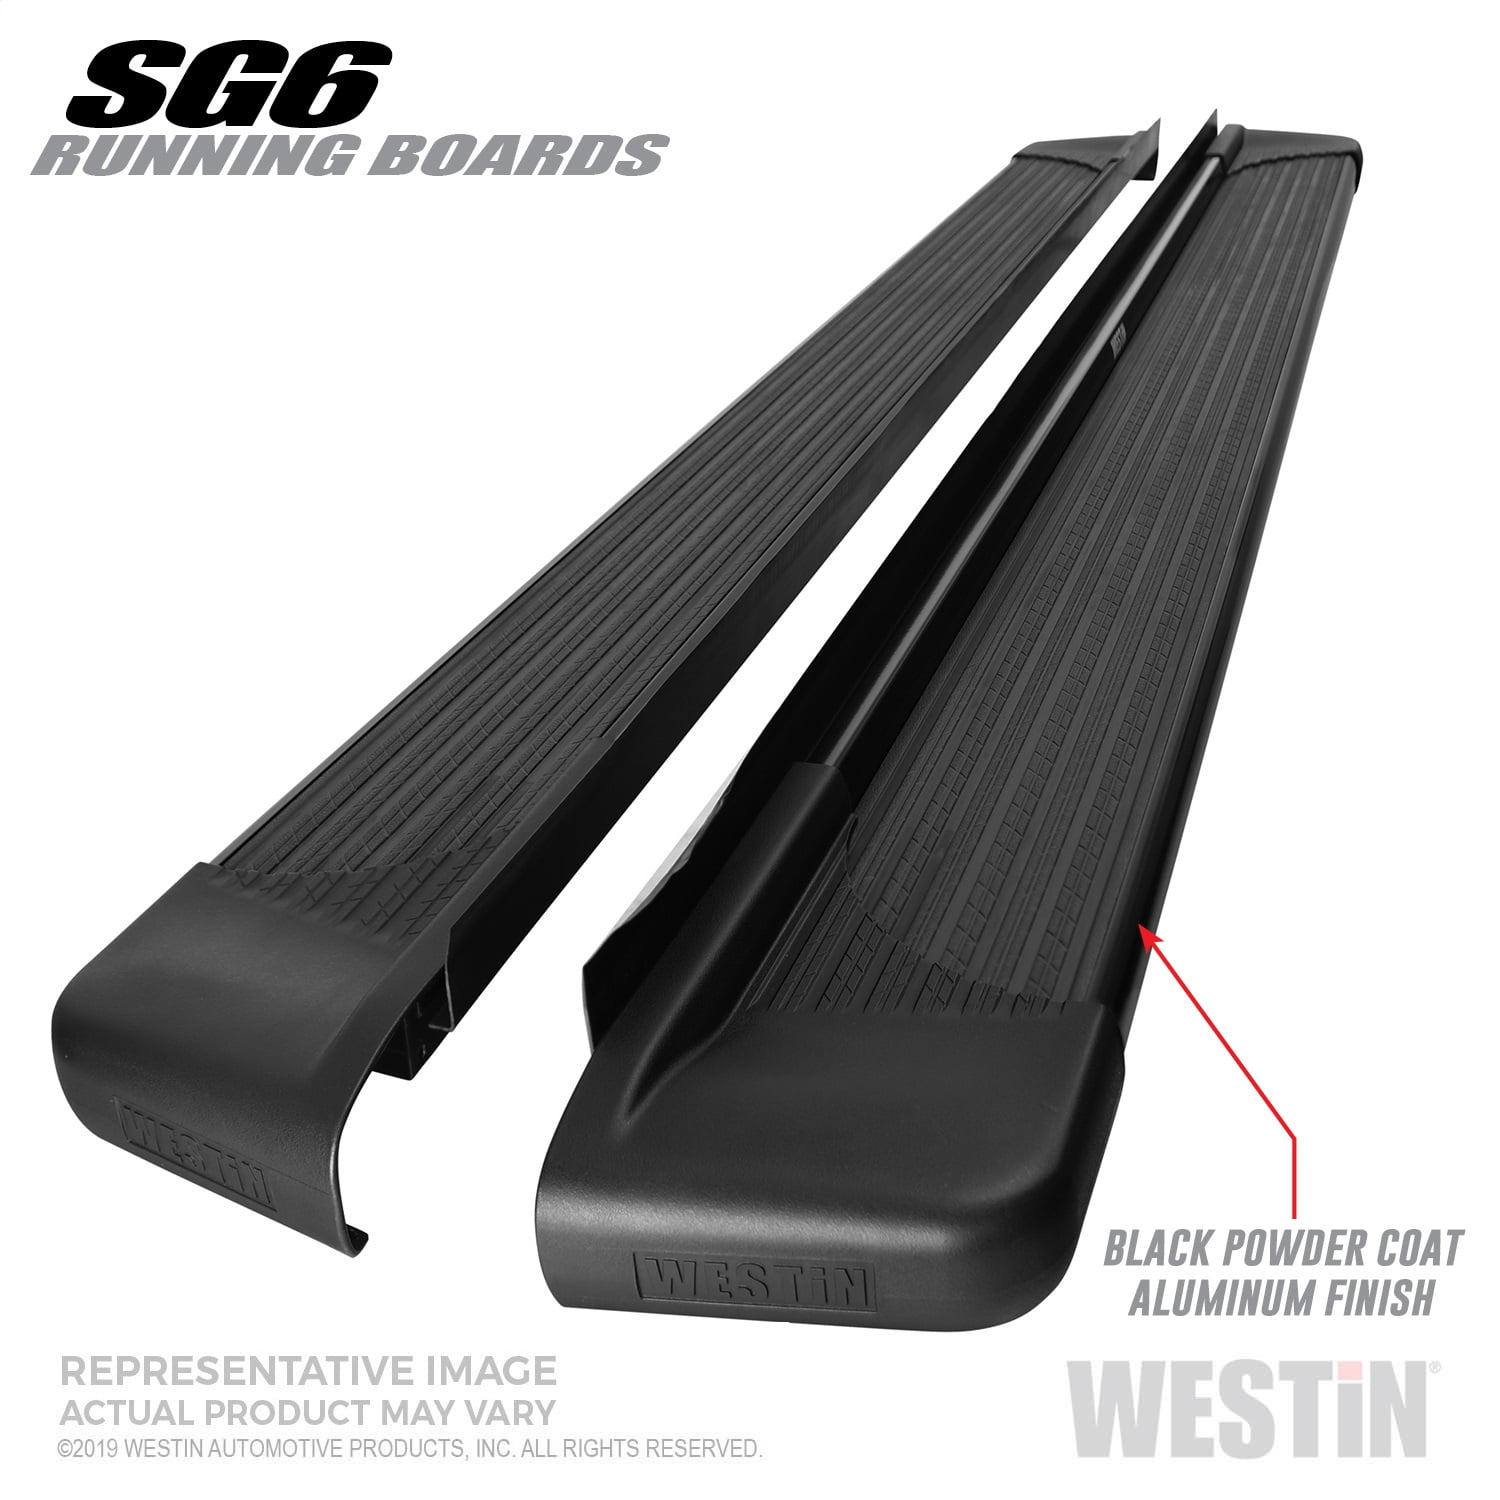 74.25 INCHES BLACK SG6 RUNNING BOARDS (BRKT SOLD SEP)